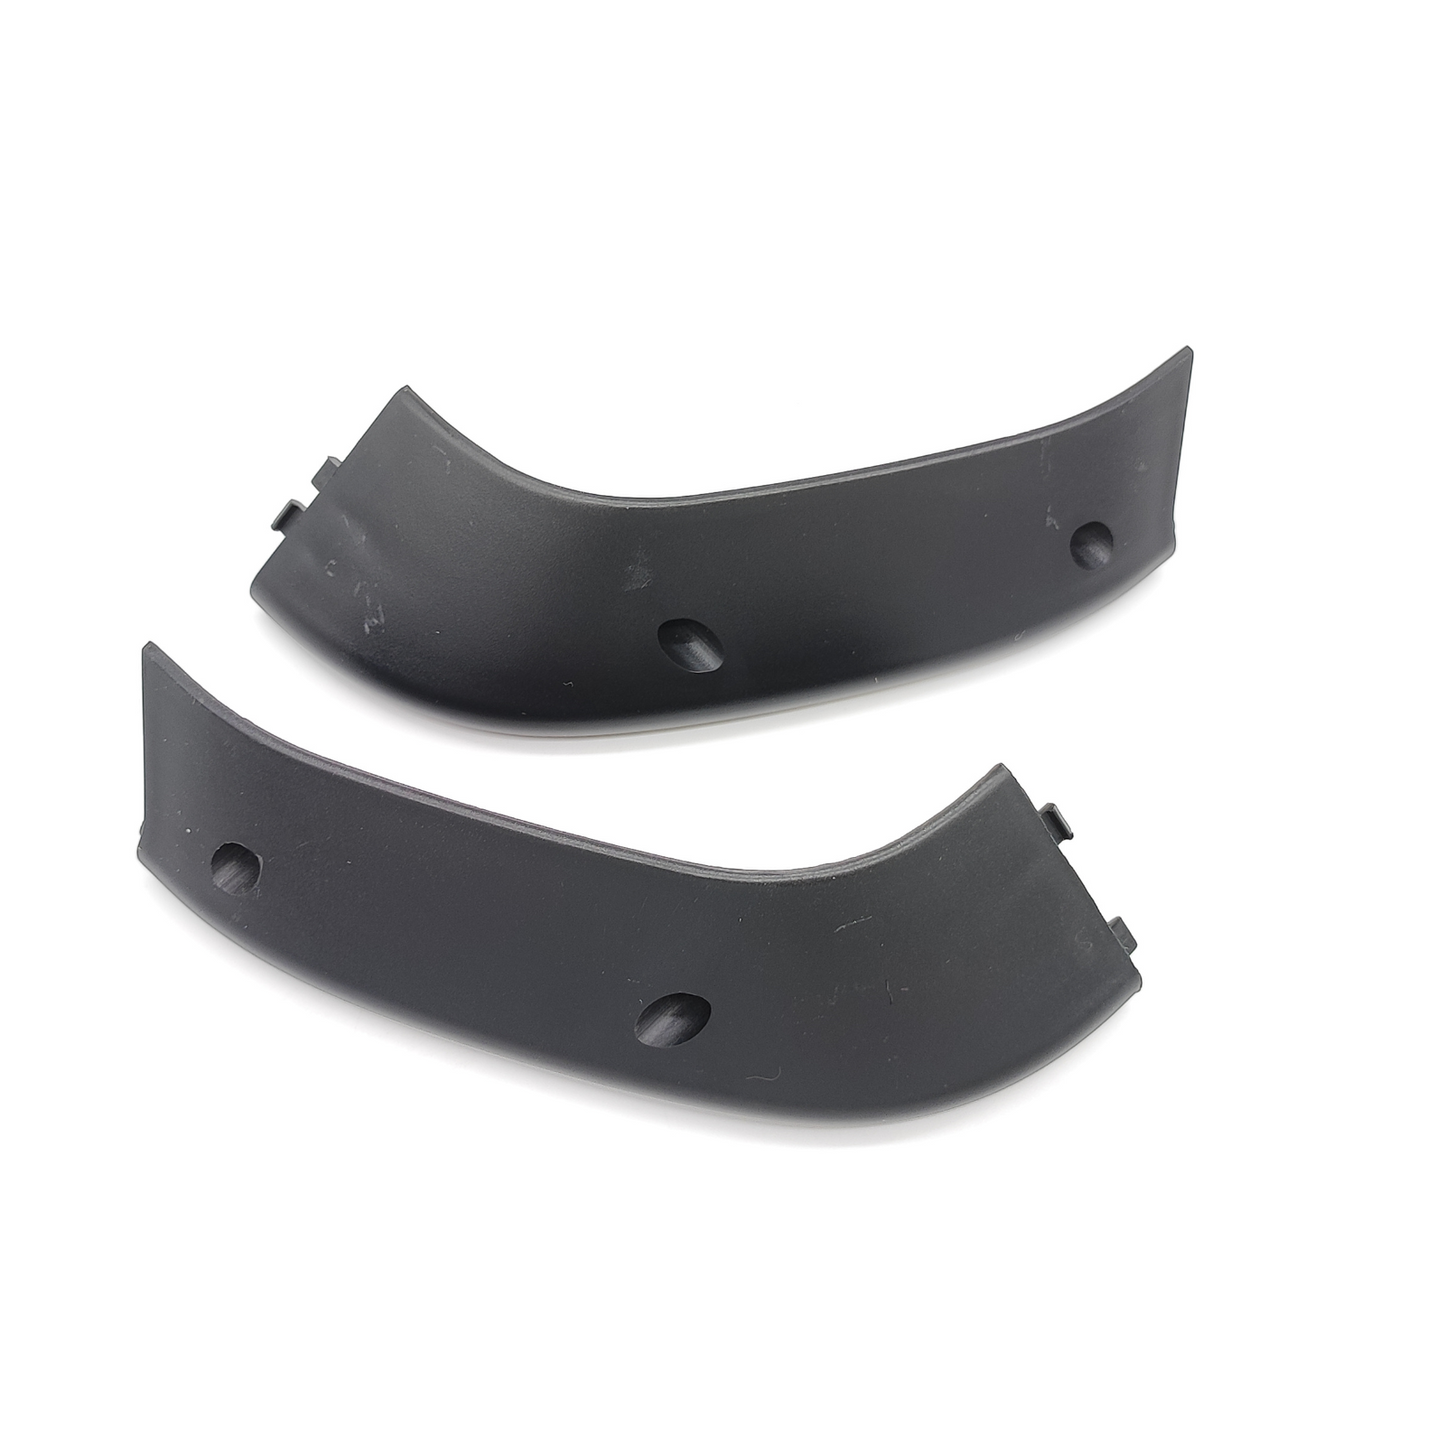 Ninebot Max G30 Front Bumper Covers Cover New